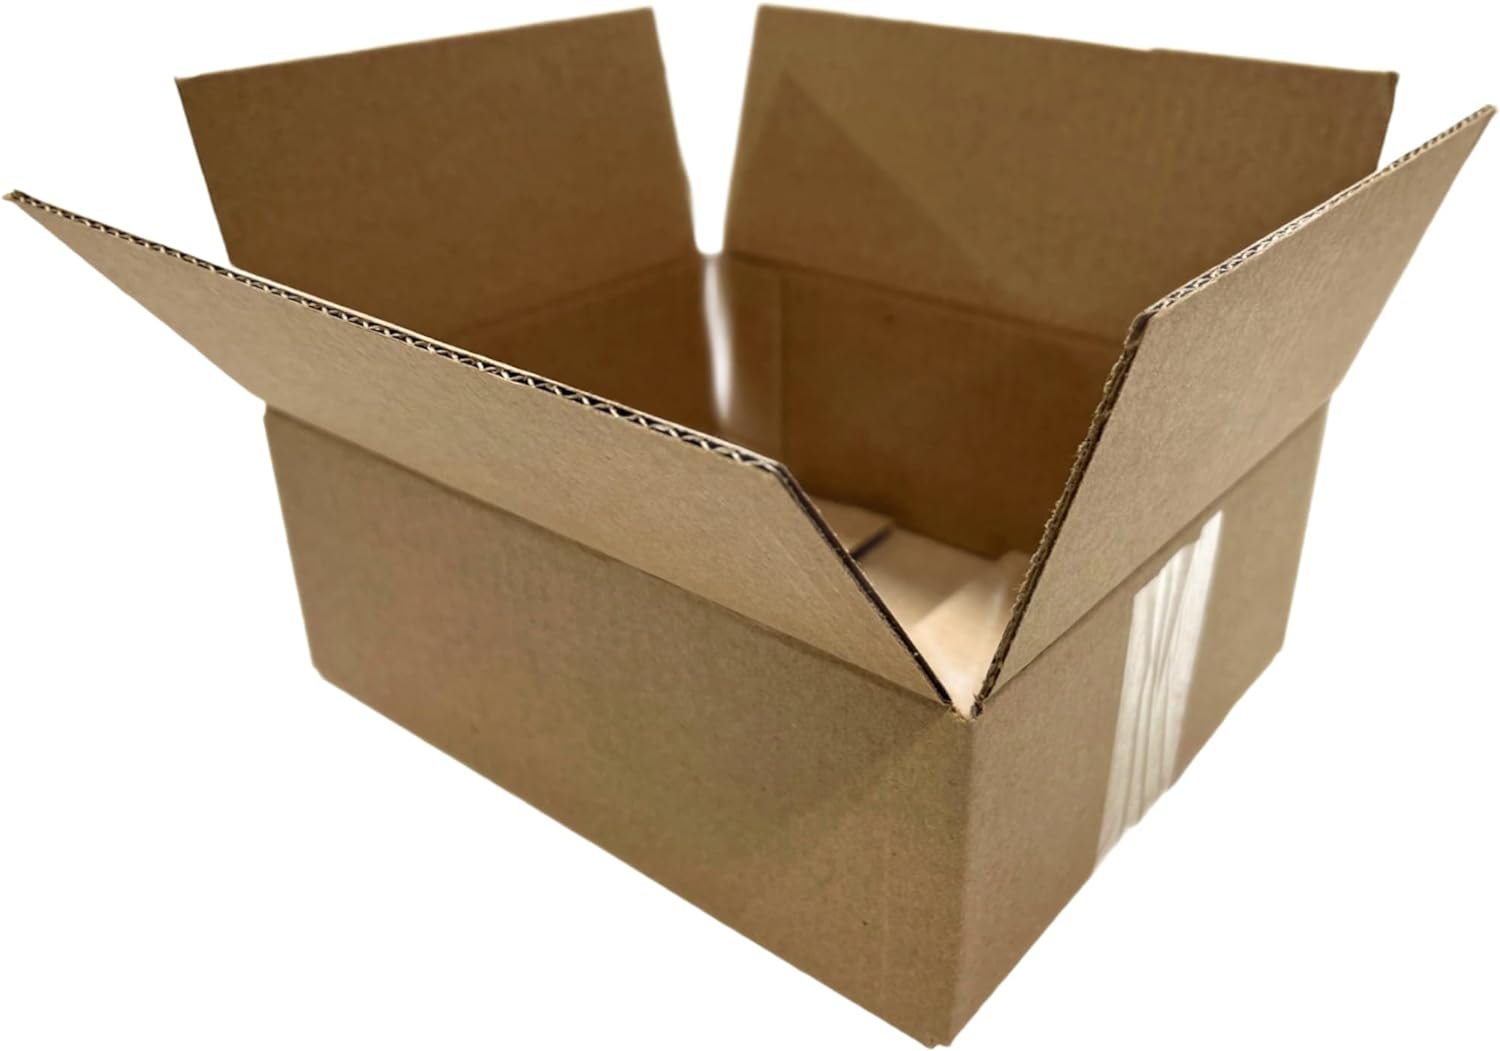 500 6x4x4 Cardboard Paper Boxes Mailing Packing Shipping Box Corrugated Carton